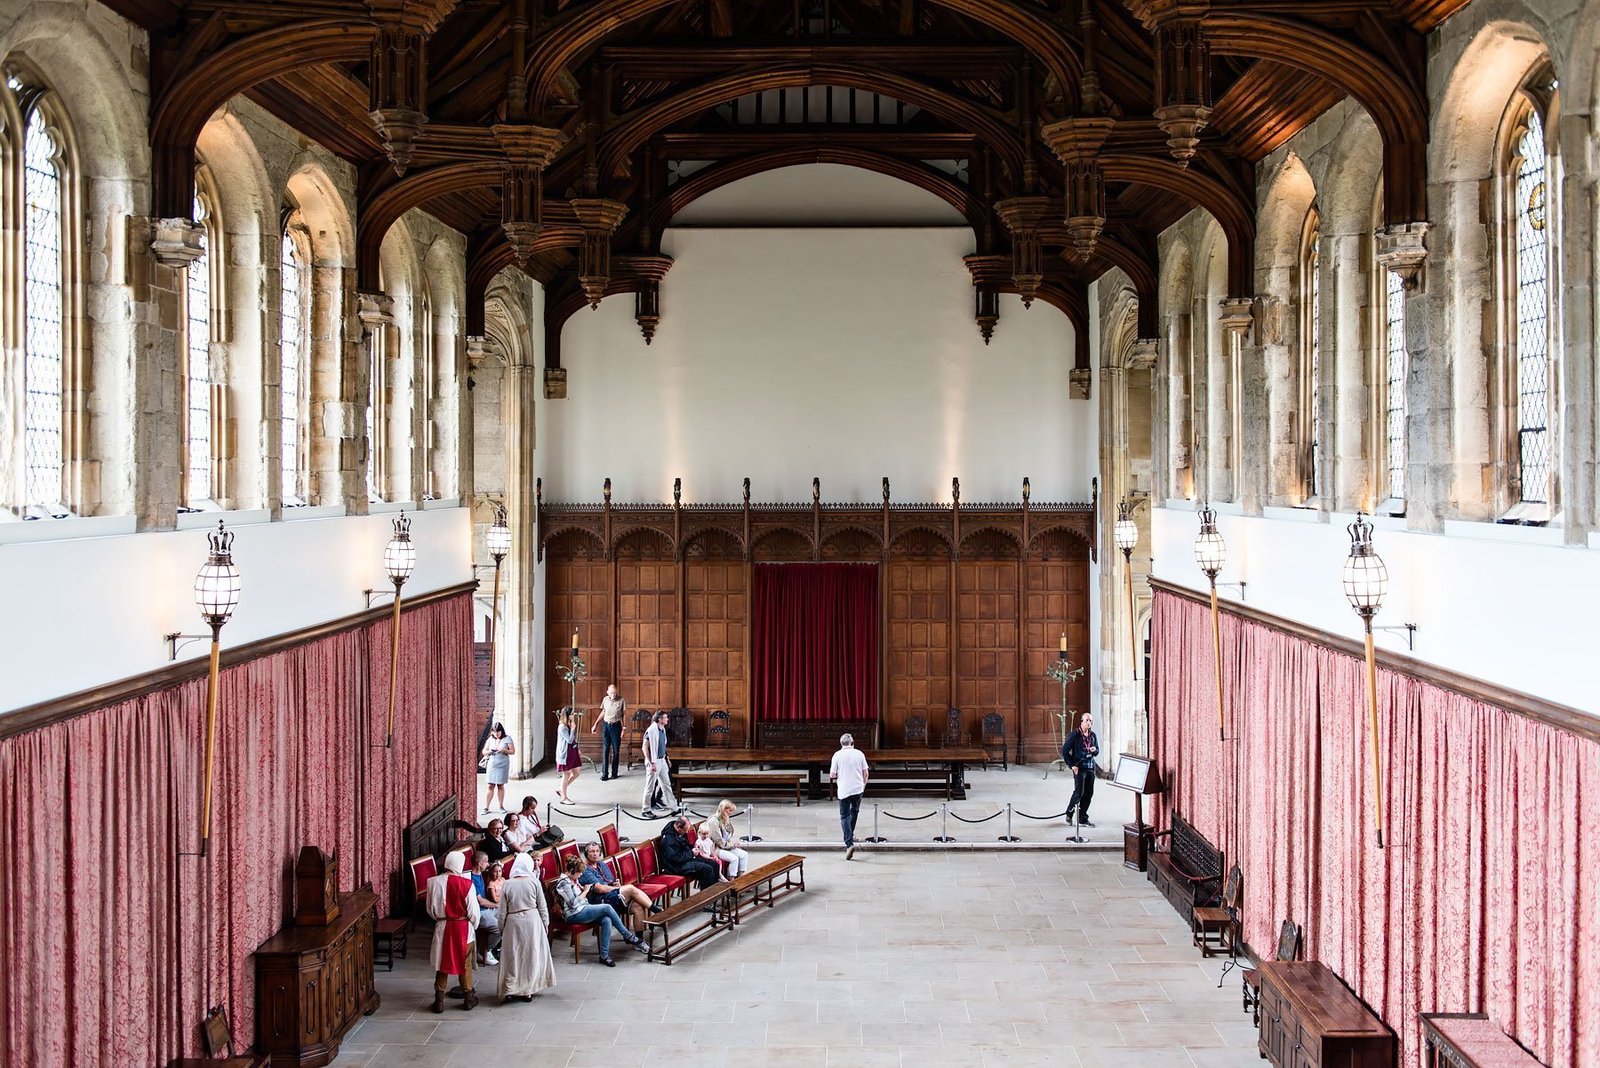 Minstrel's Gallery and medieval Great Hall at Eltham Palace in London